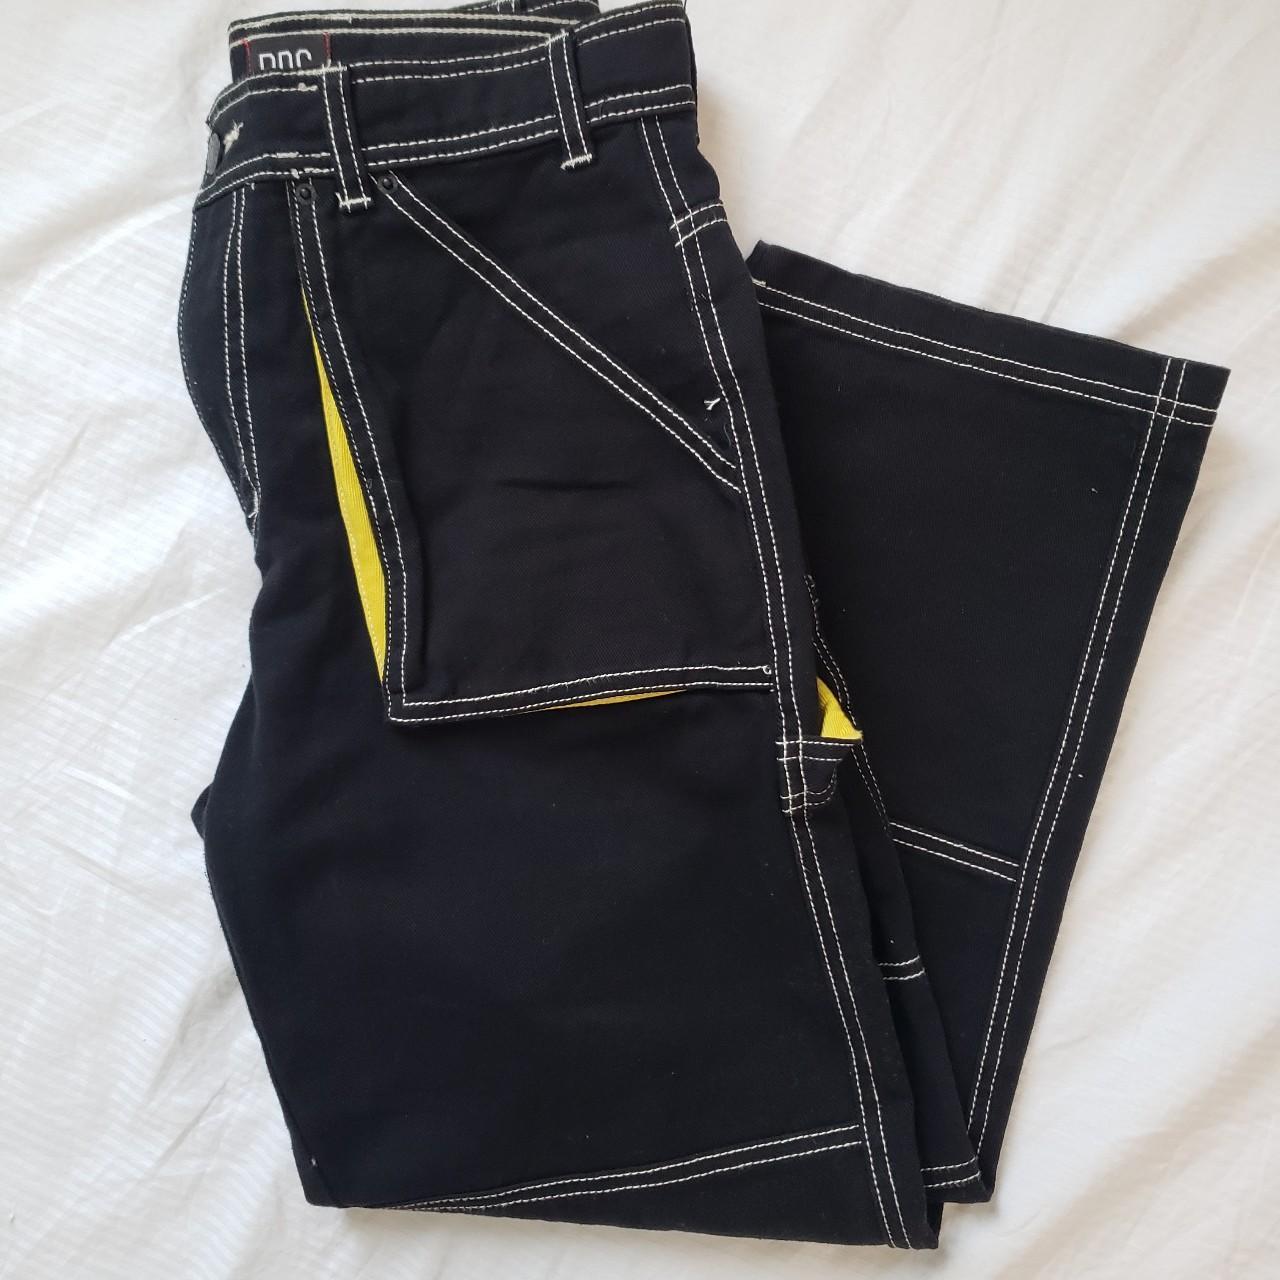 BDG Women's Black and Yellow Jeans